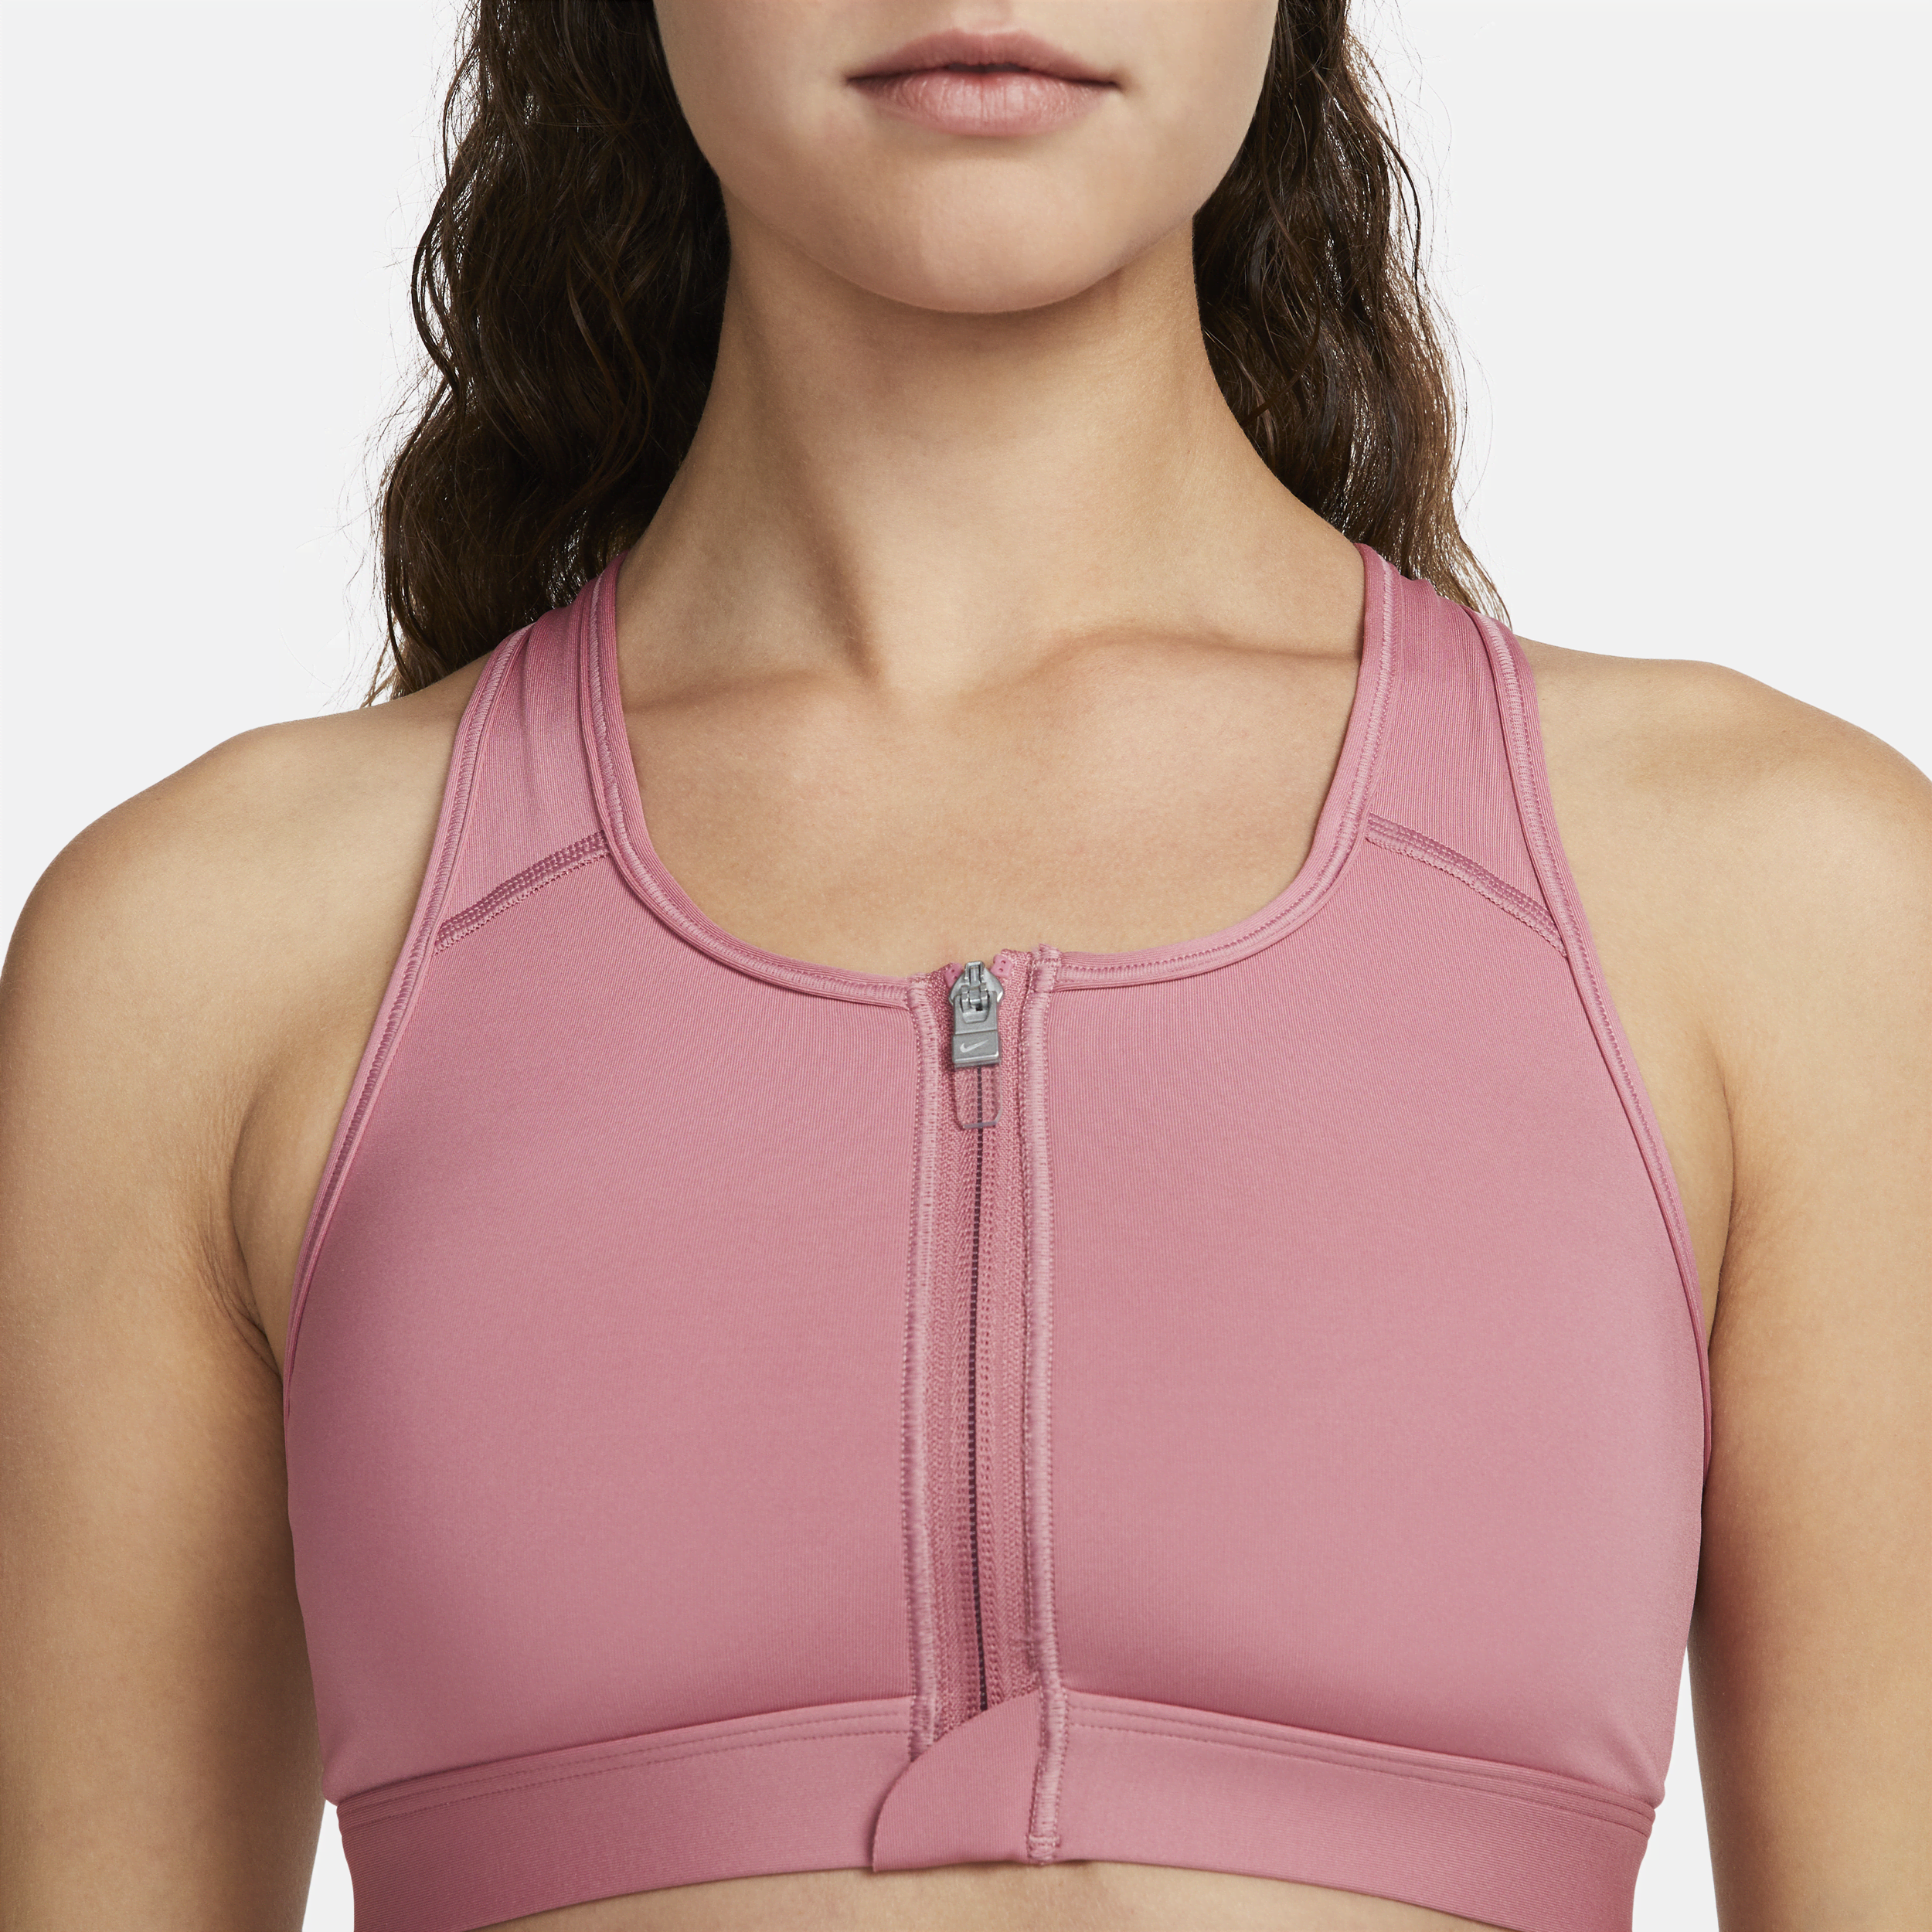 RISING STAR sports bra with front zipper, sports bra with front